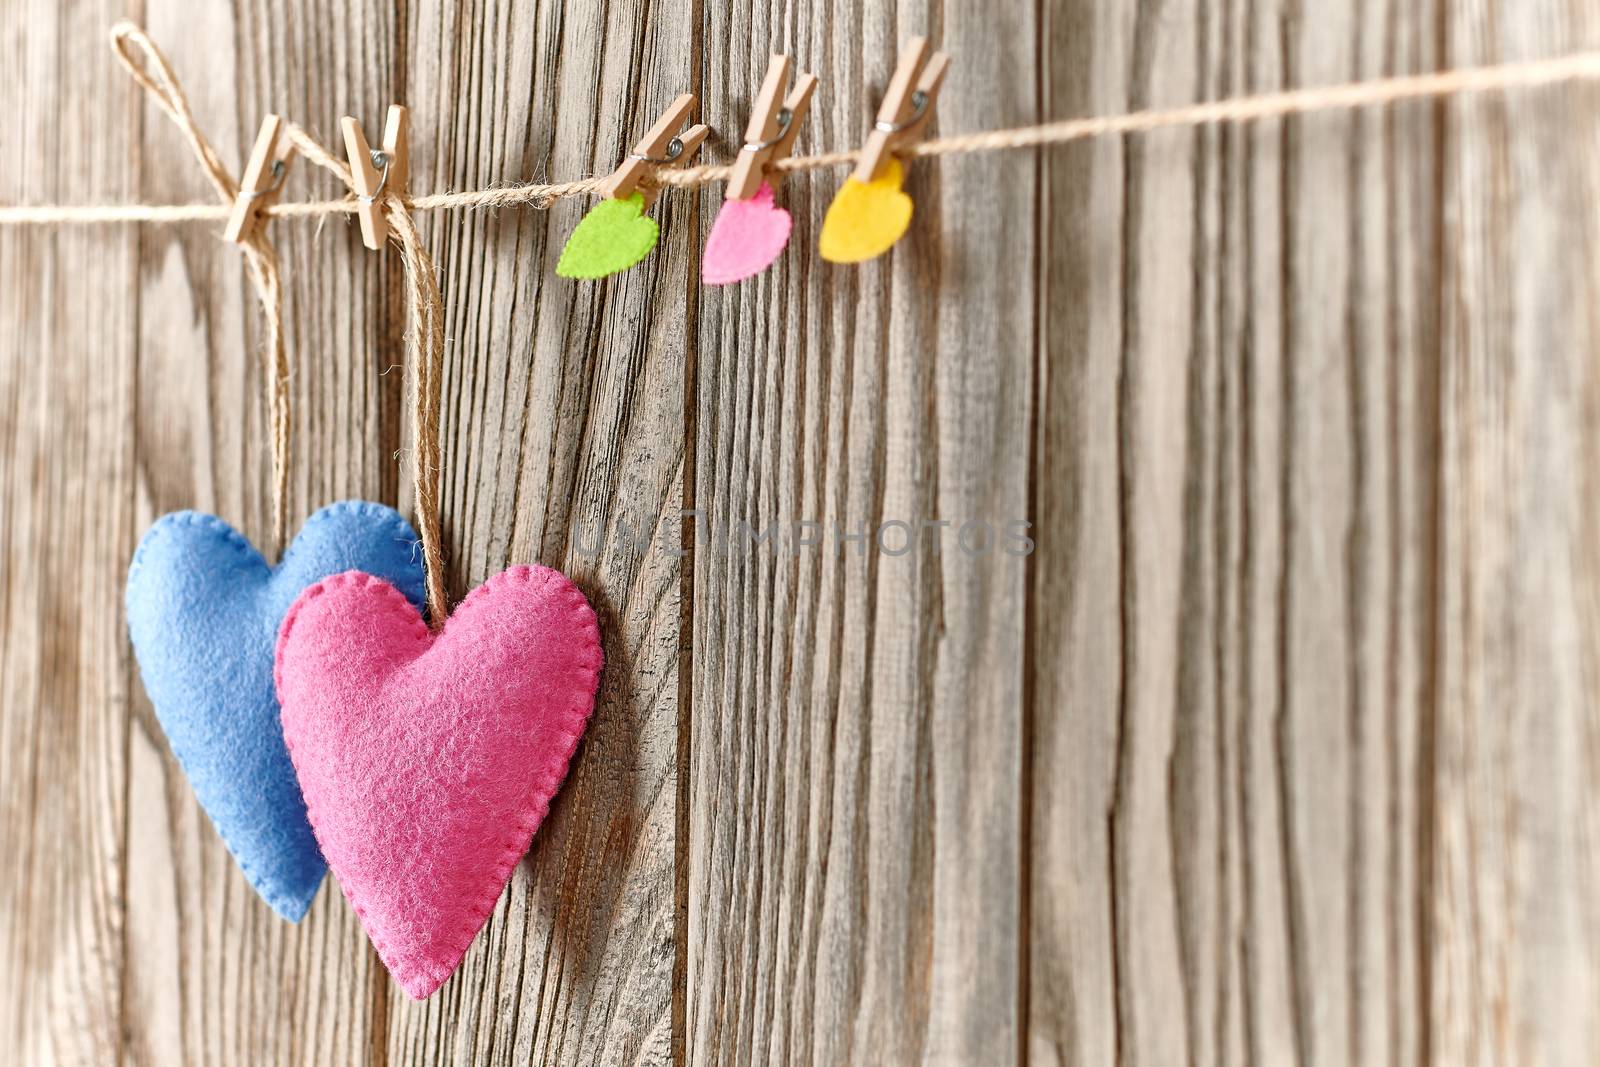 Love hearts, Valentines Day. Hearts couple, handmade, hanging on rope. Vintage romantic style on wooden background. Vivid unusual greeting card, multicolored felt, perspective, copyspace